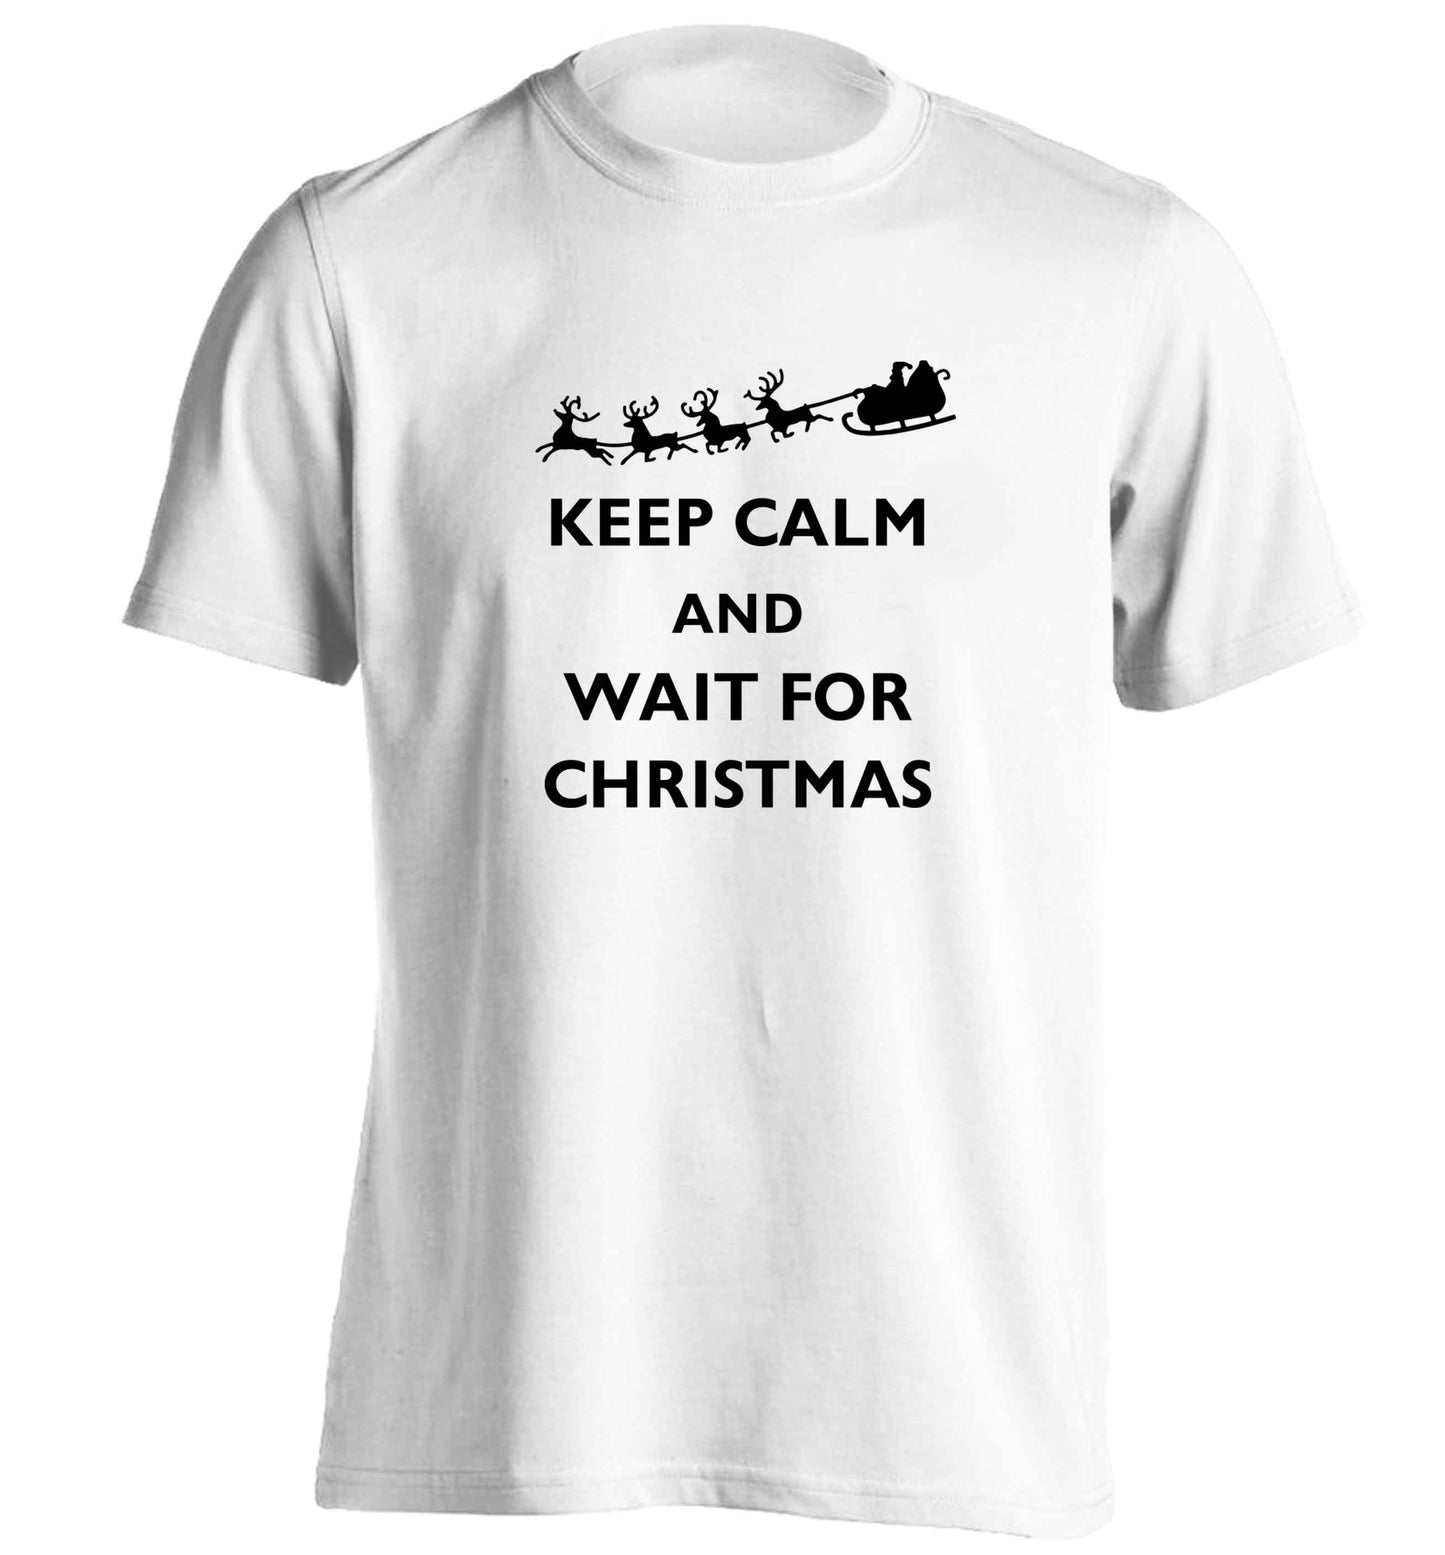 Keep calm and wait for Christmas adults unisex white Tshirt 2XL